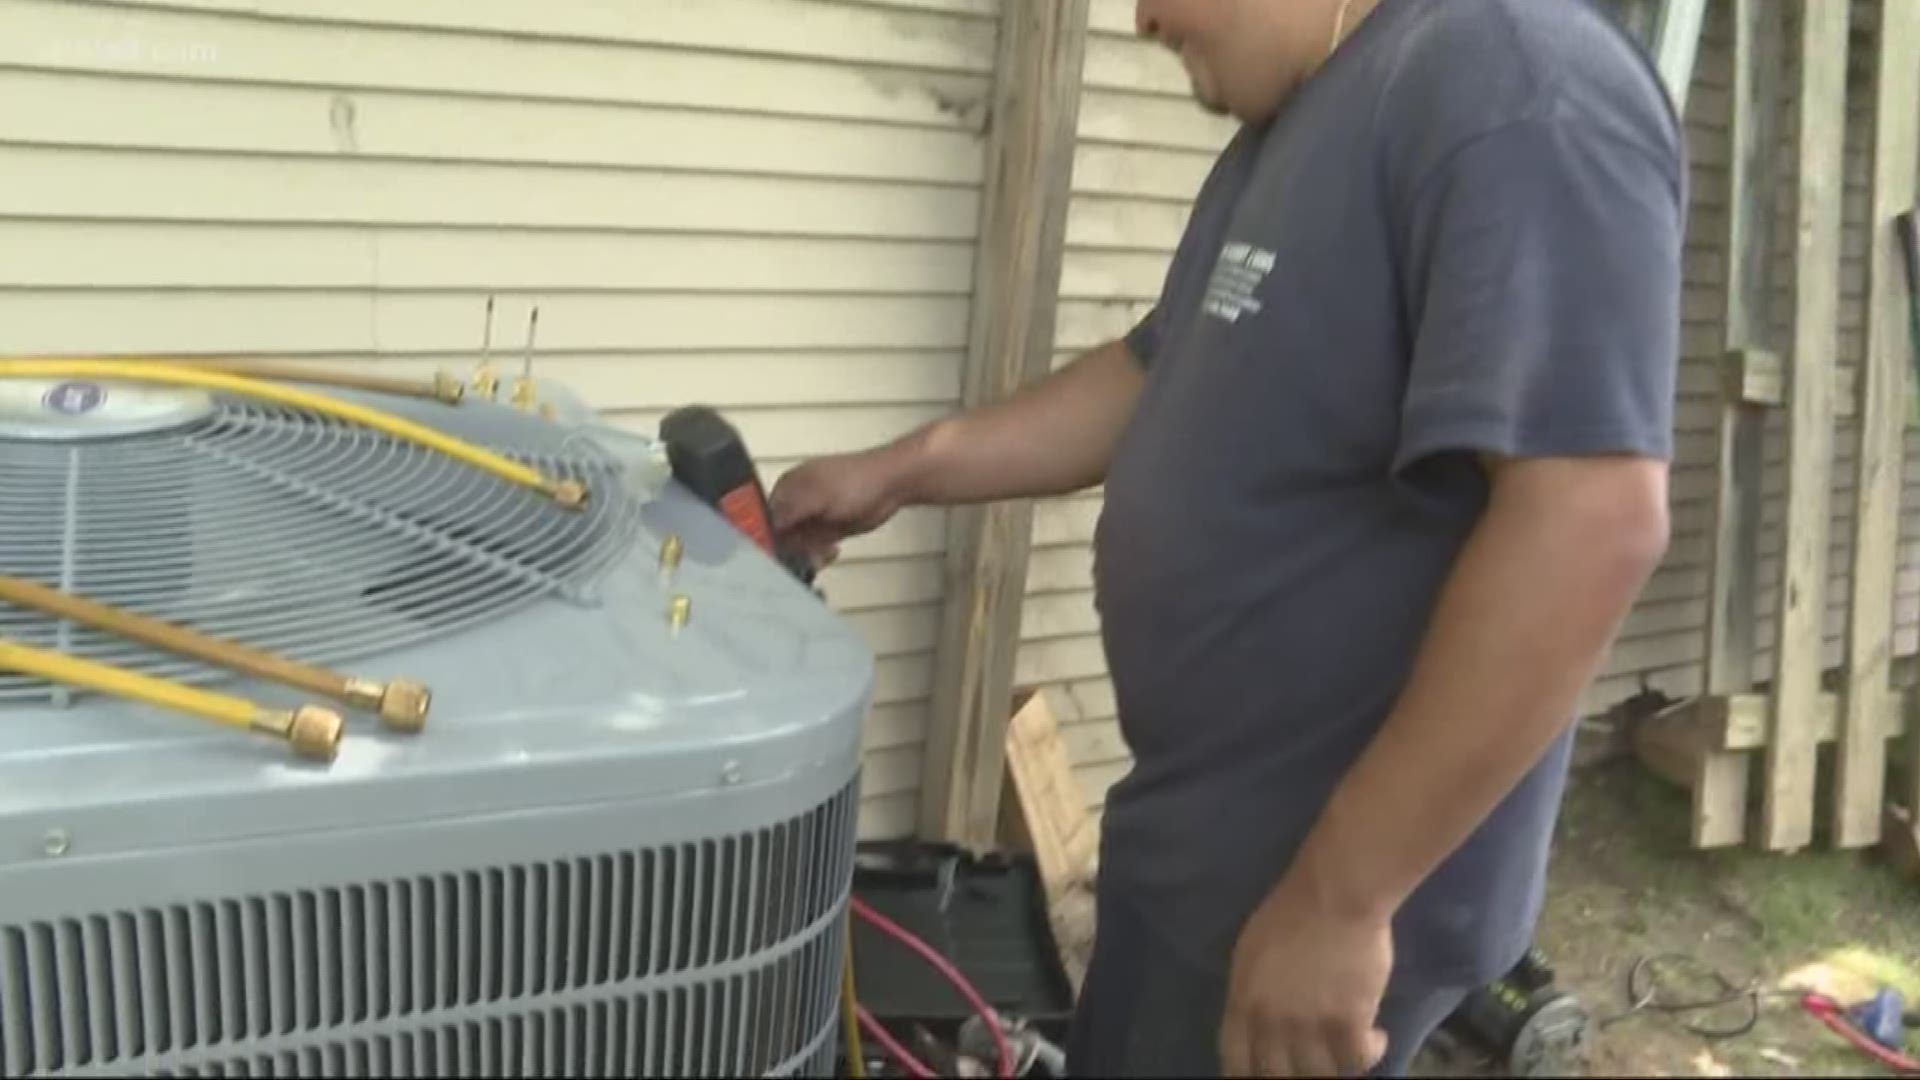 Turning off unnecessary appliances, keeping your thermostat and 78 degrees and keeping ducts or fans unblocked are a few air conditioning tips for the rising temperatures.